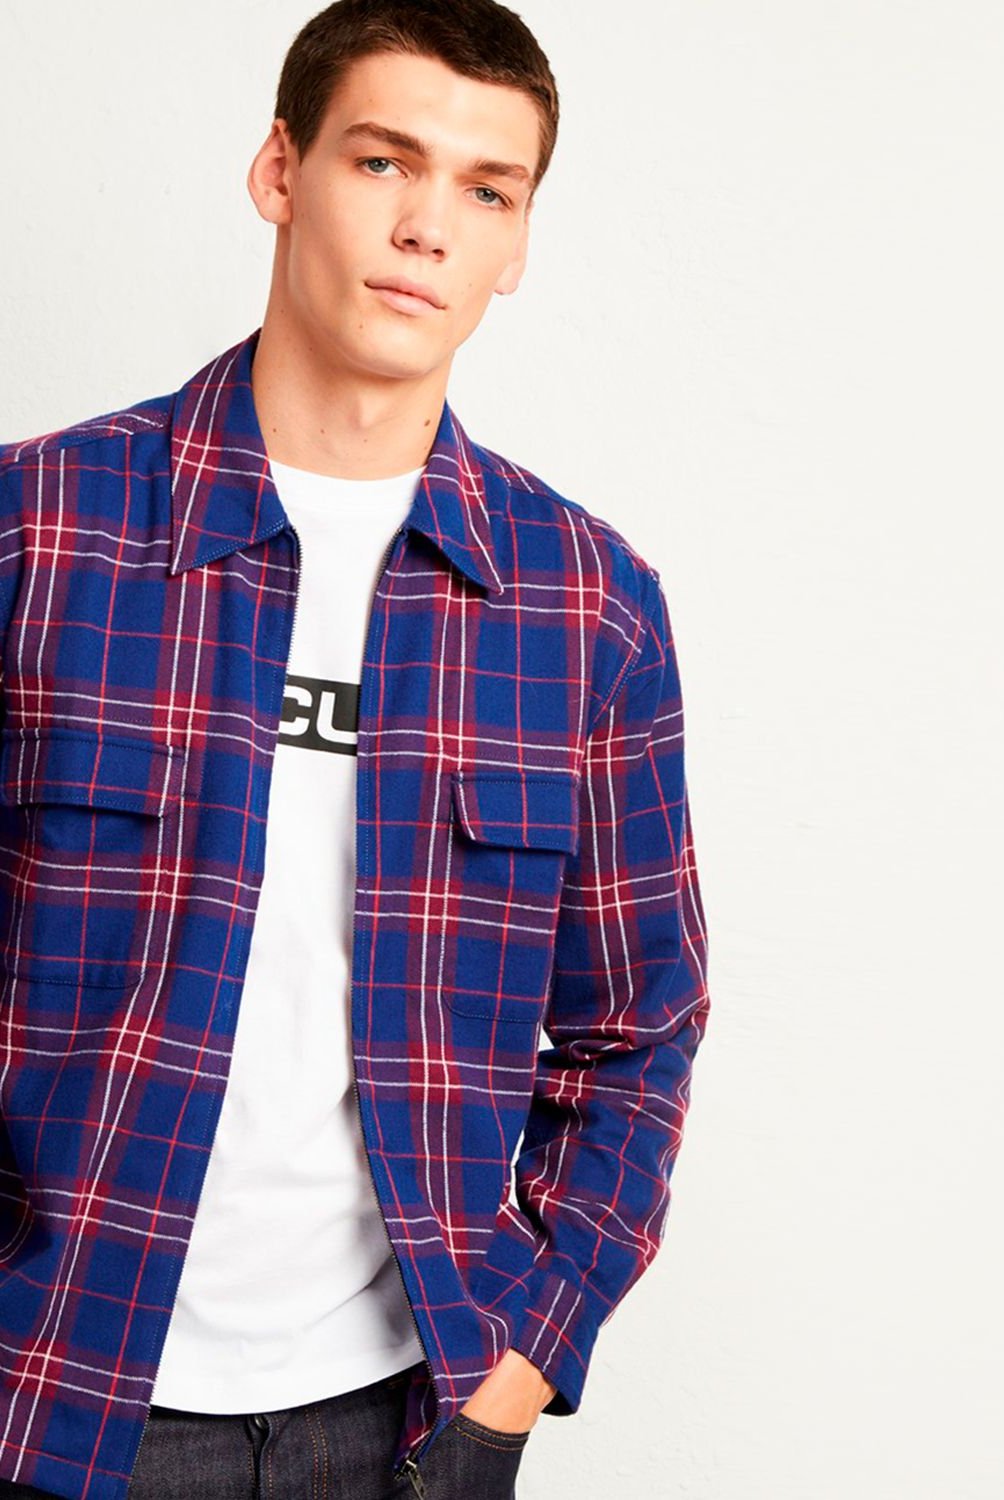 FRENCH CONNECTION - Camisa Tabora Flannel Azul